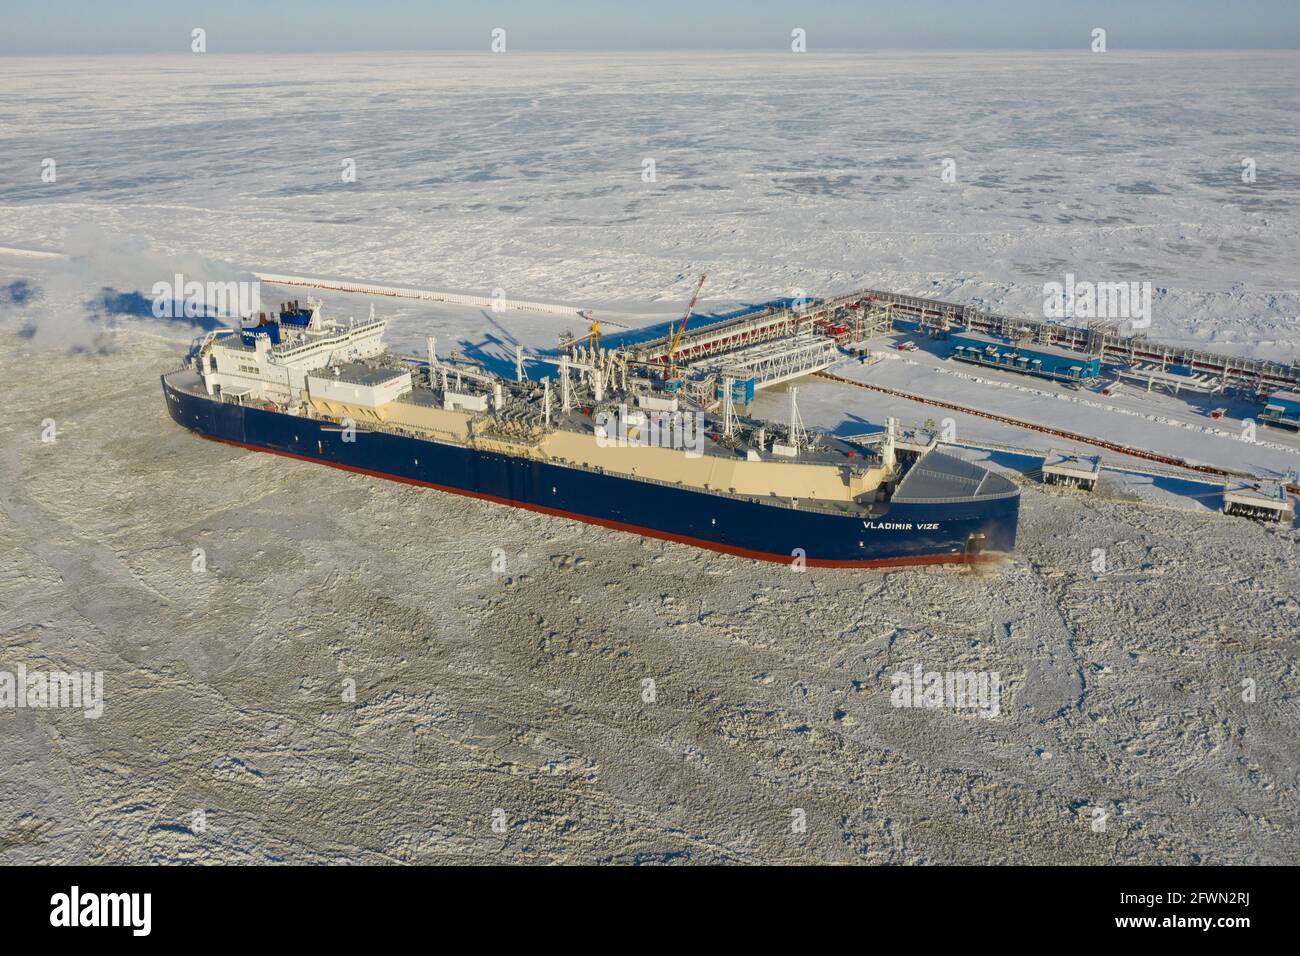 Sabetta, Tyumen region, Russia - March 30, 2021: The Vladimir Vize gas carrier is loaded with liquefied natural gas at the berth. Stock Photo